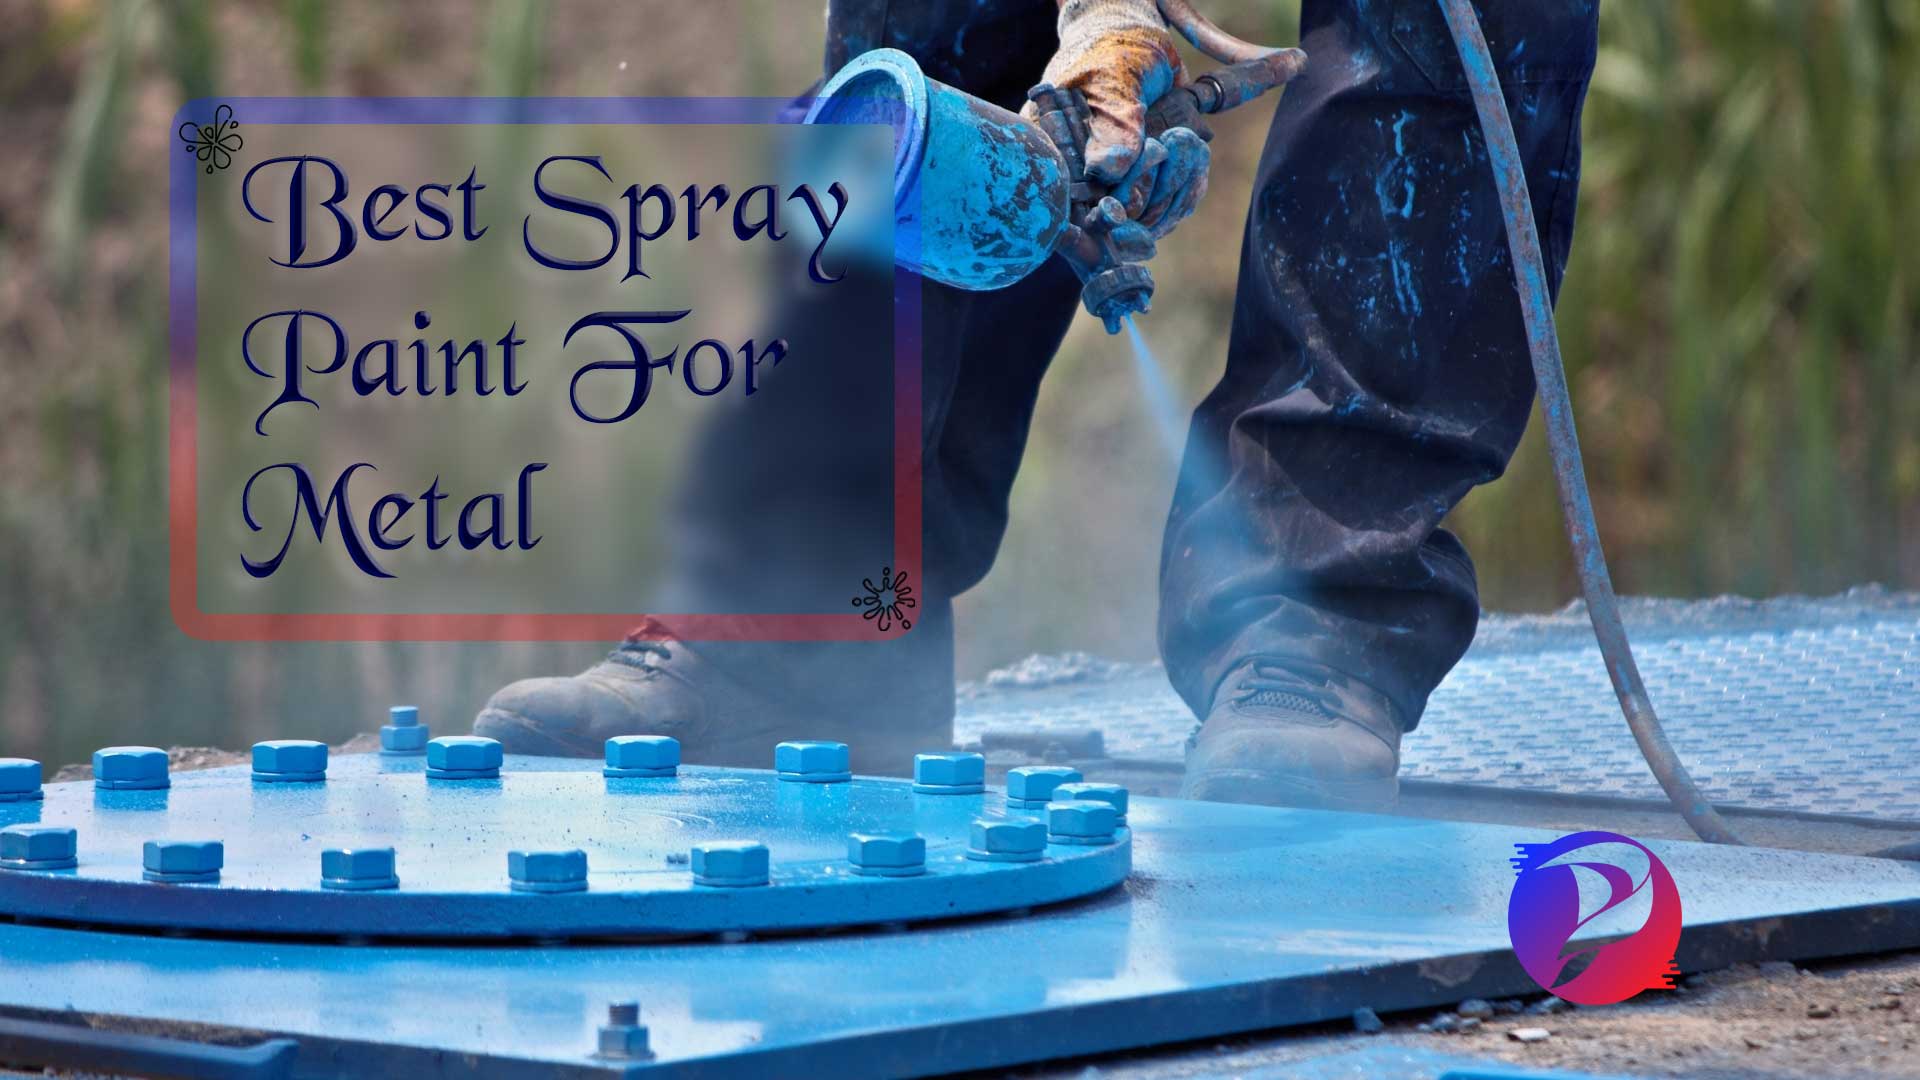 Best spray paint for powder coated metal